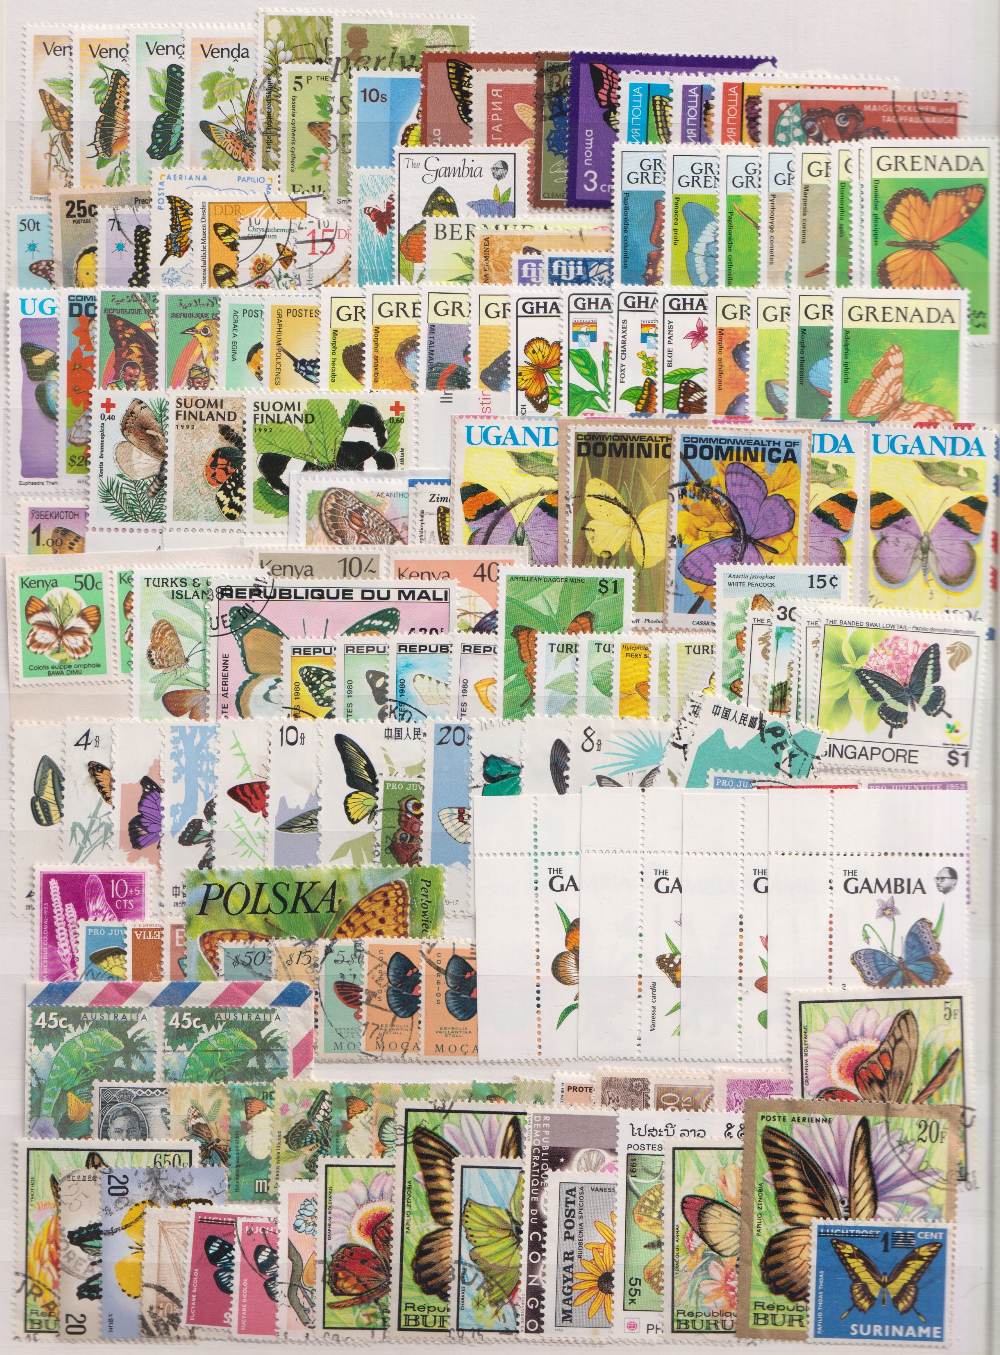 Stamps, All world thematic butterfly collection, mint and used, includes Grenada, Gambia, - Image 2 of 6